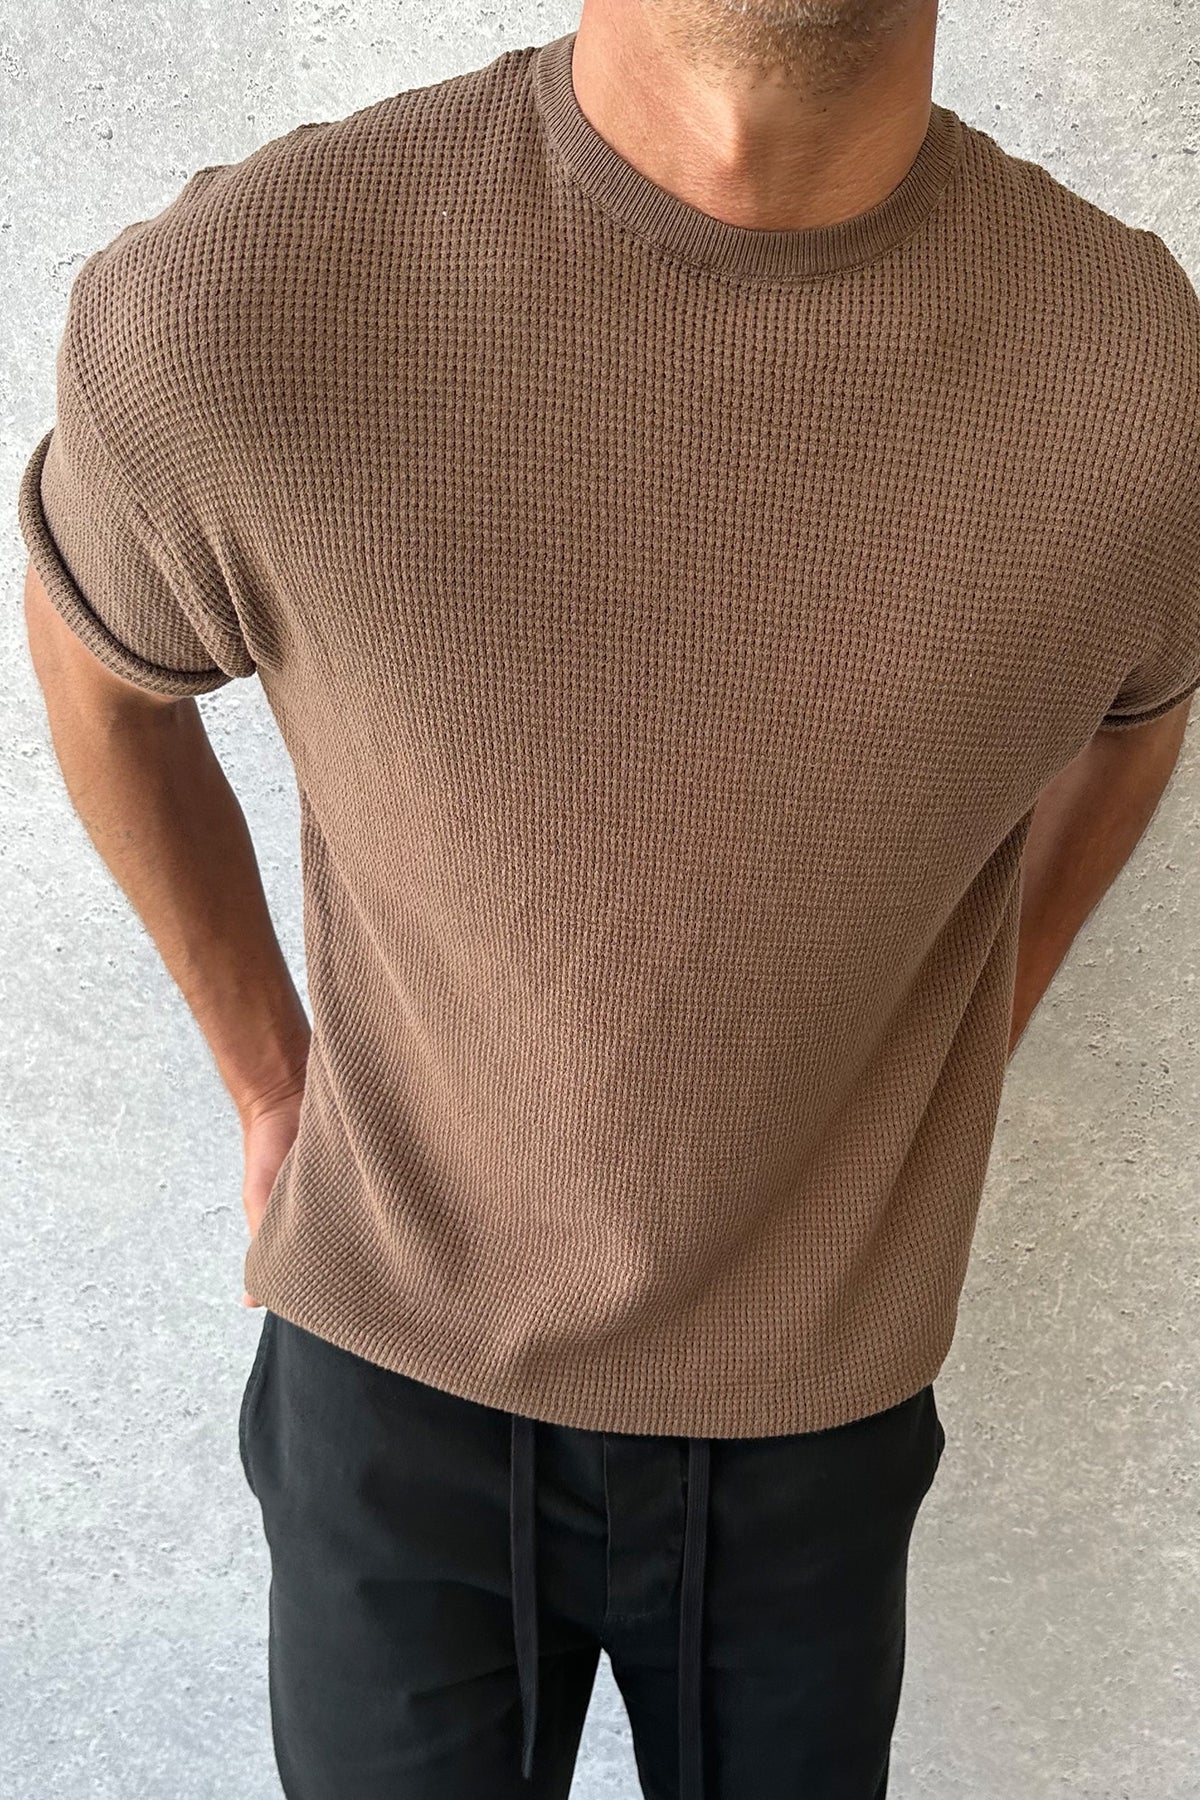 NTH Knitted Tee Choc - FINAL SALE